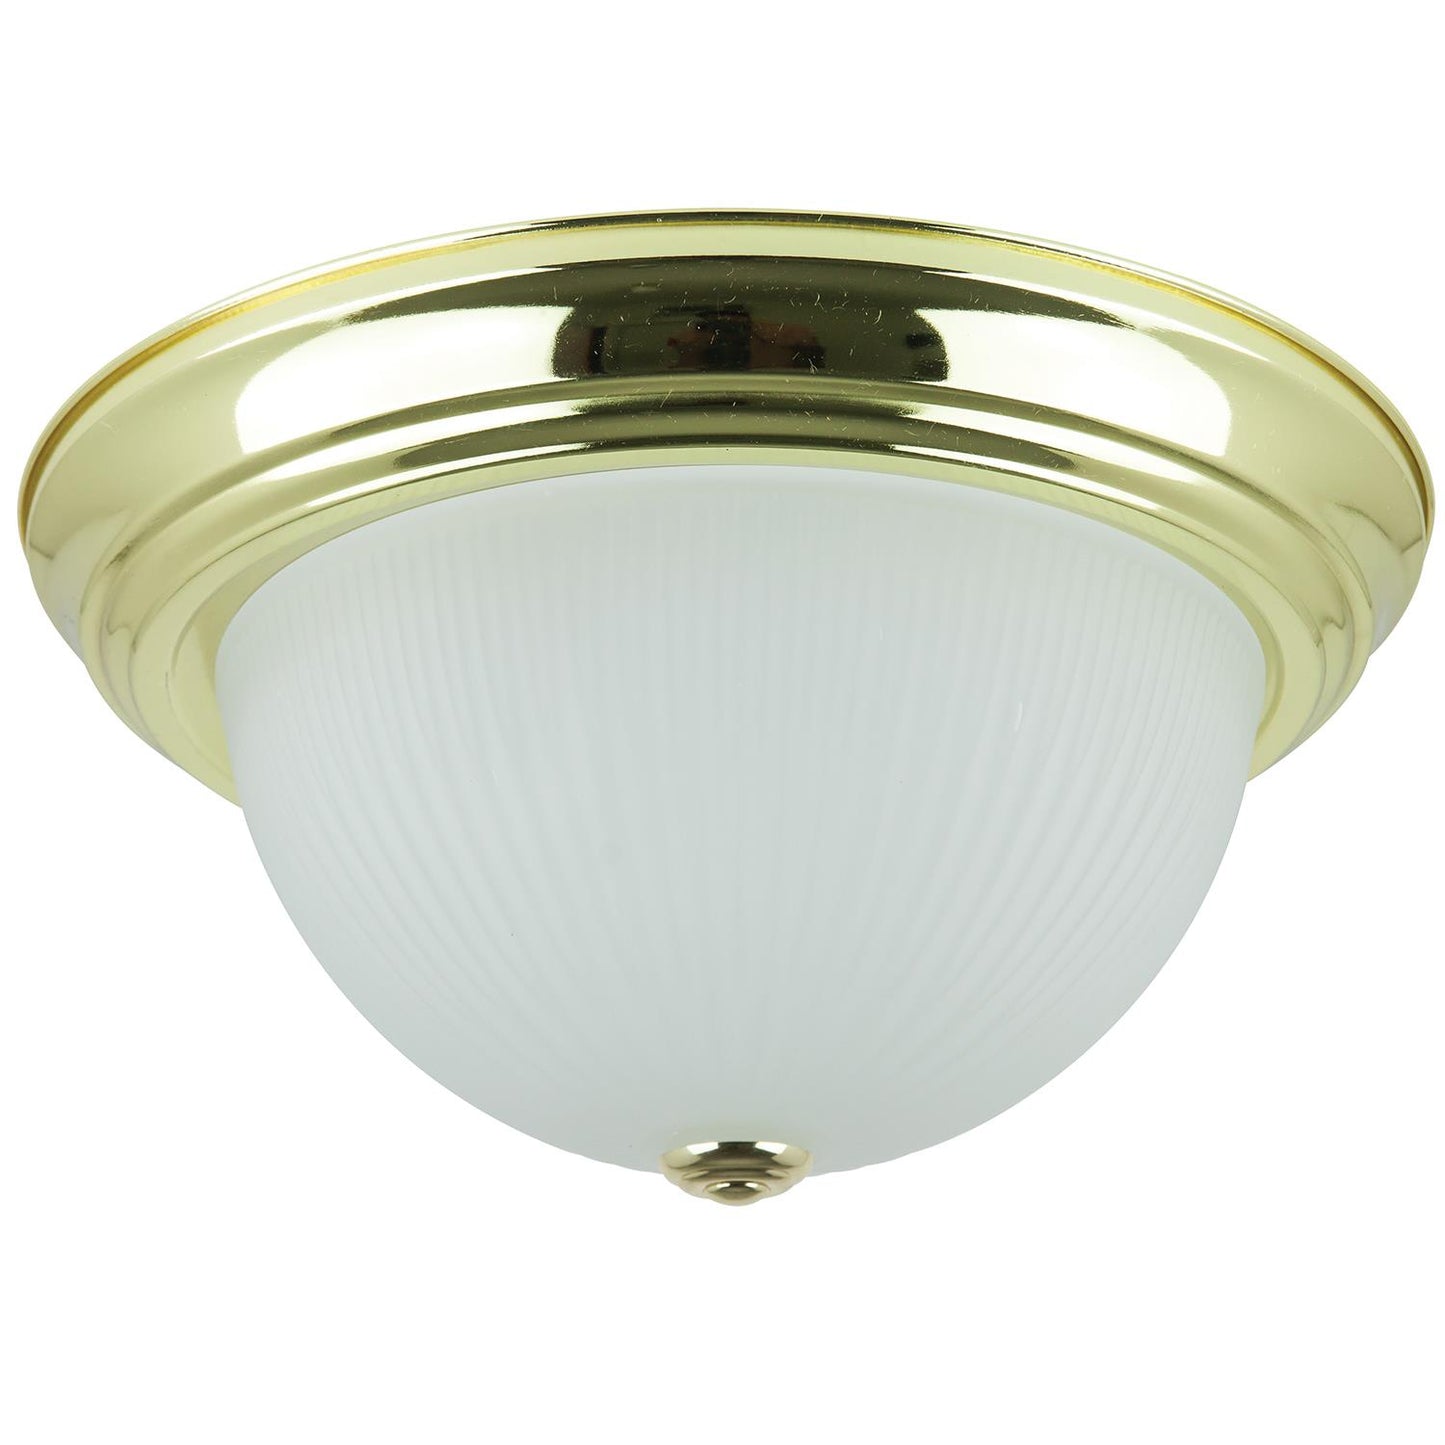 Sunlite 13" Decorative Dome Ceiling Fixture, Polished Brass Finish, Frosted Glass